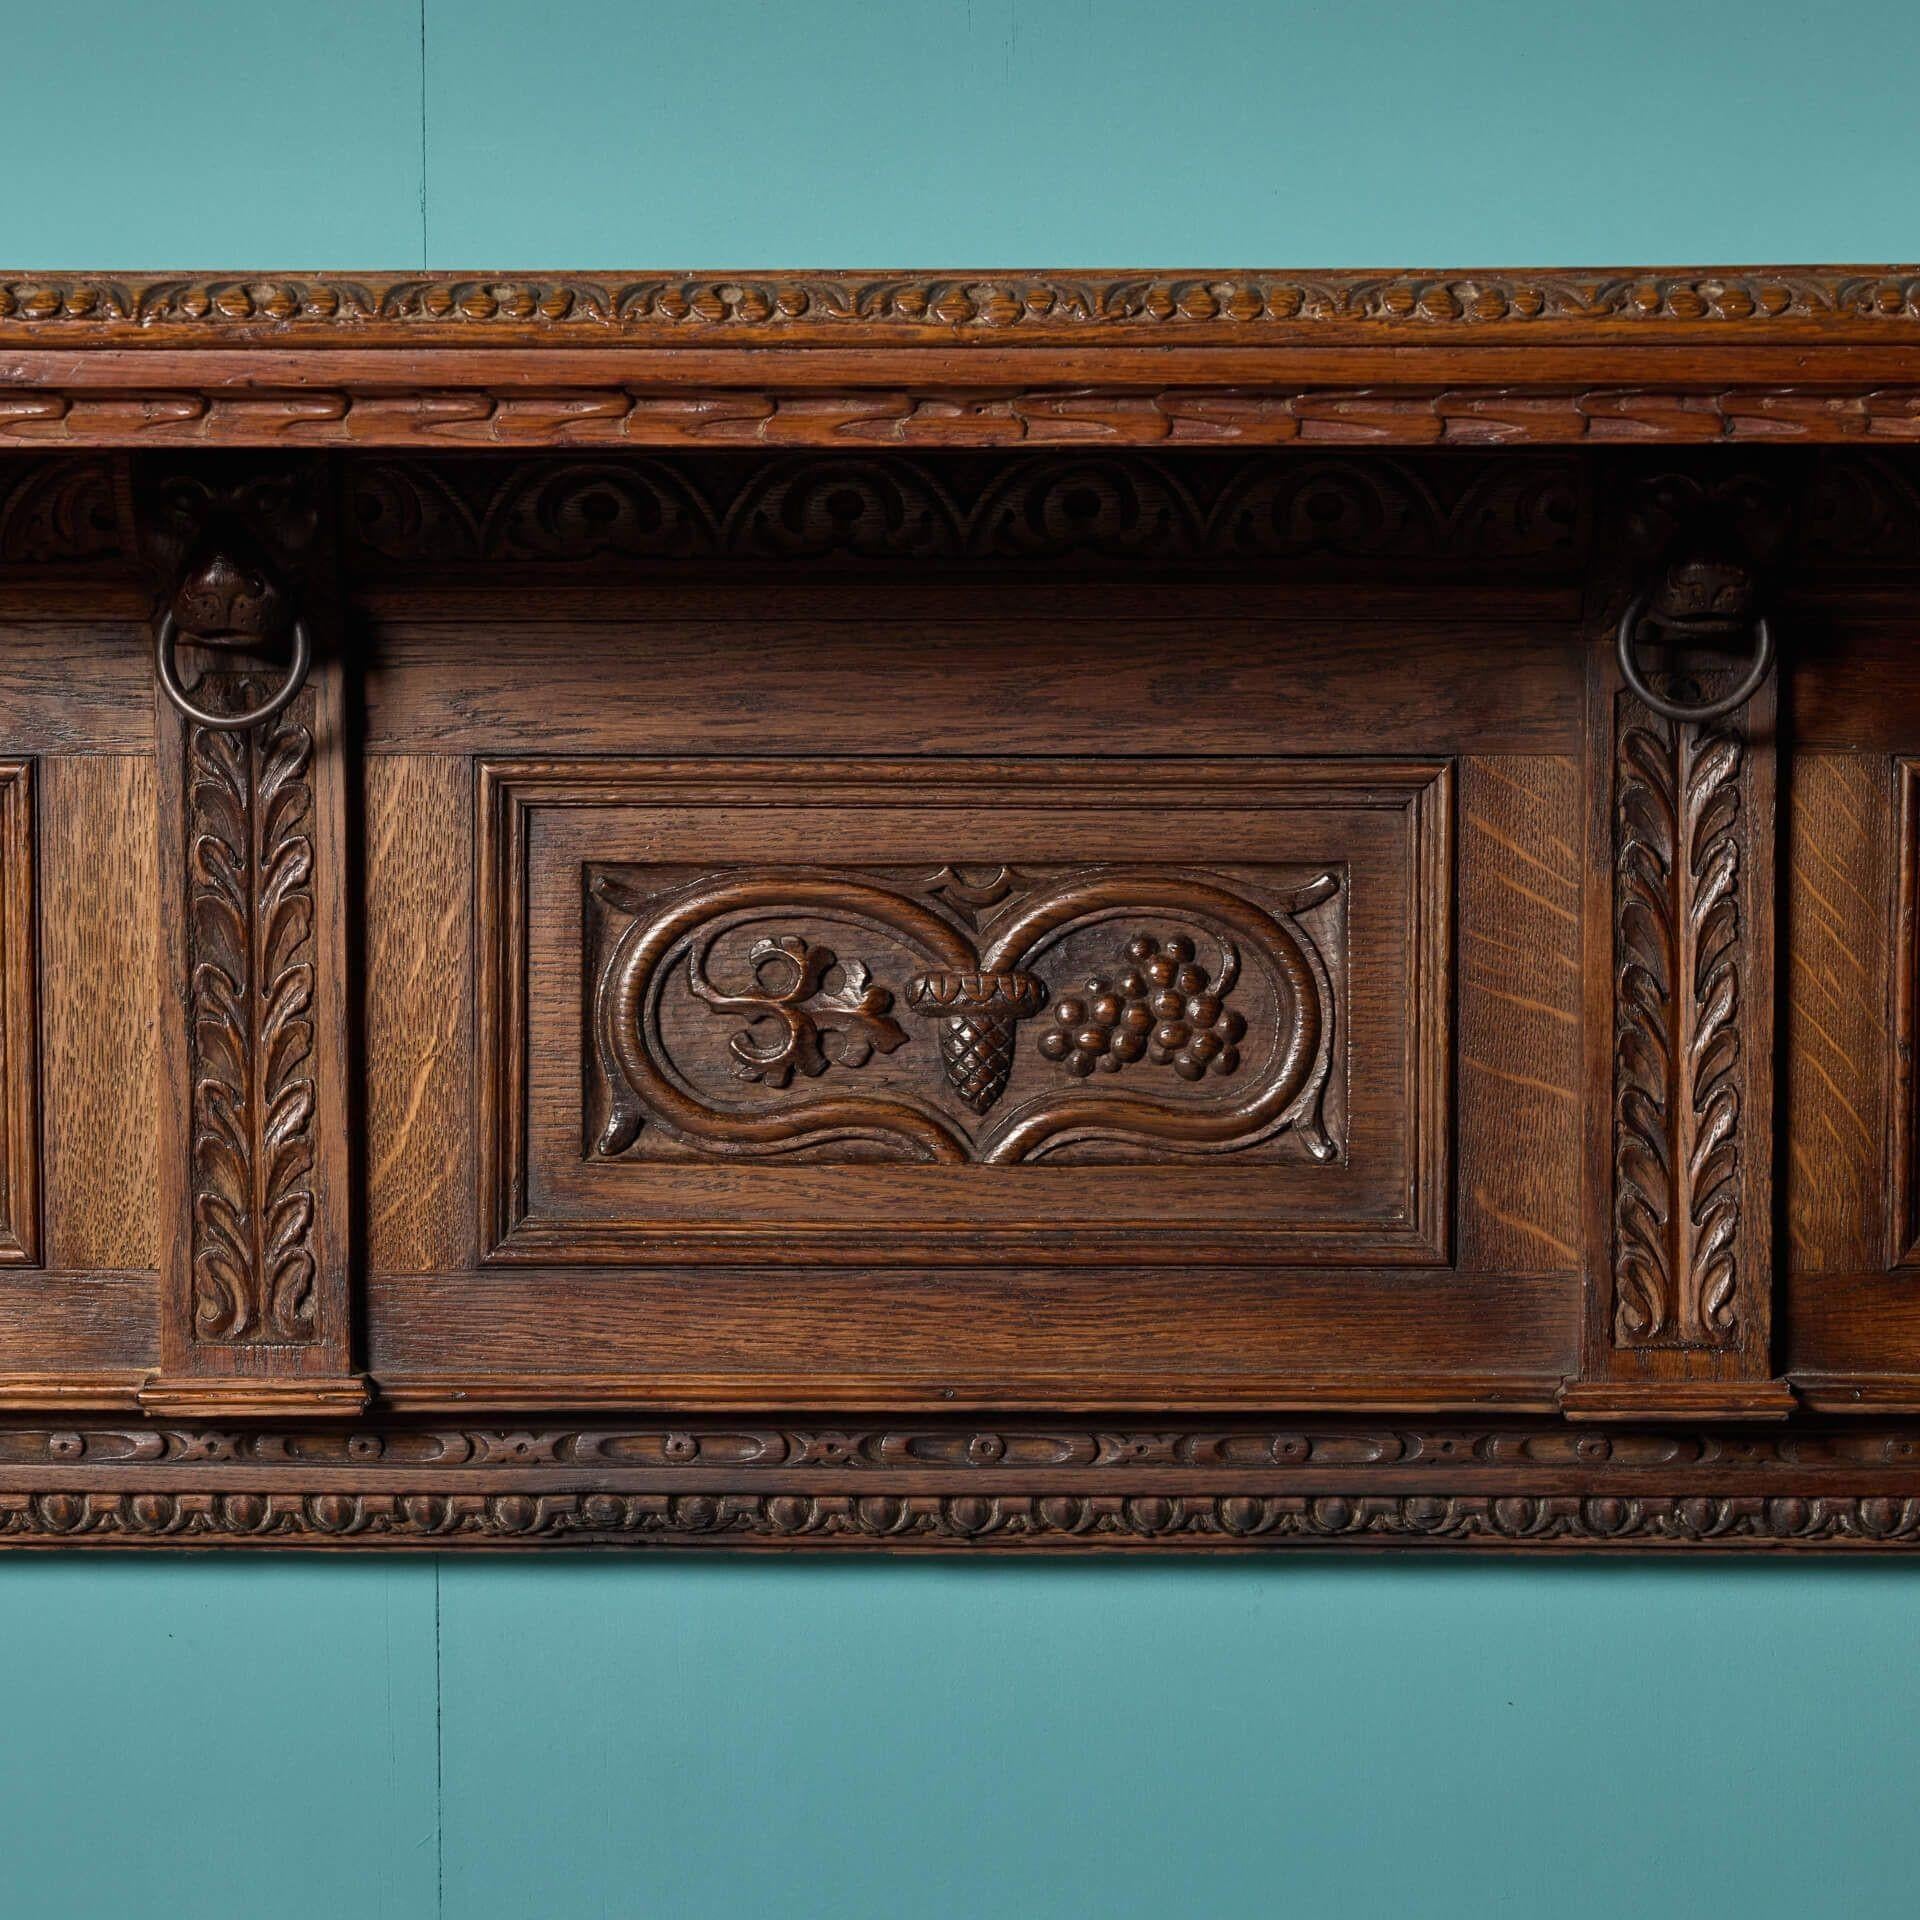 Antique Carved English Oak Fireplace In Fair Condition For Sale In Wormelow, Herefordshire